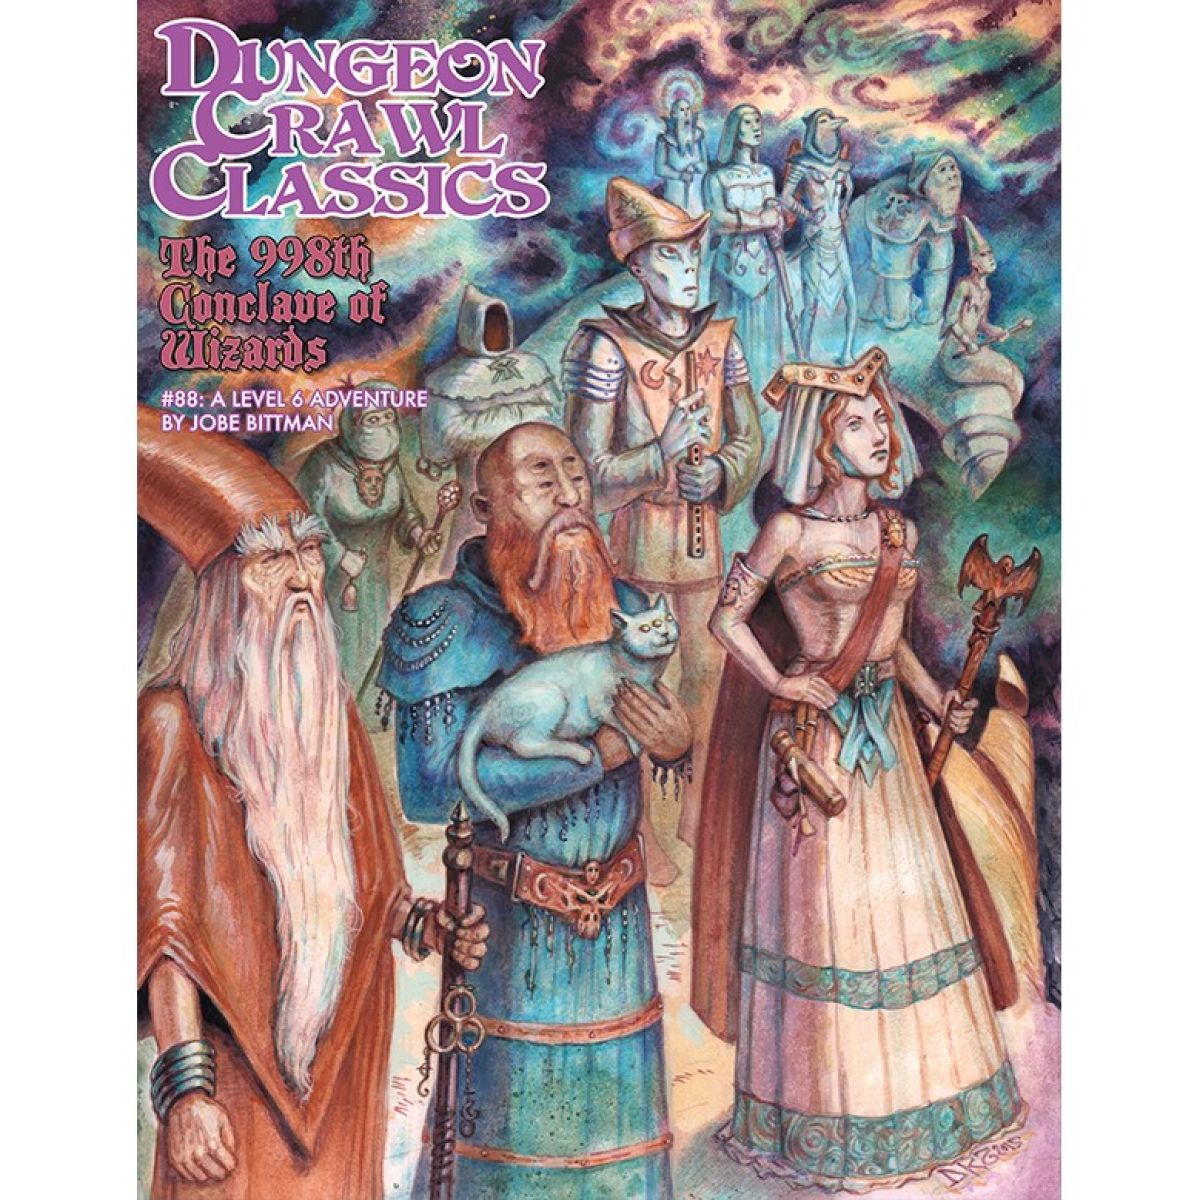 Dungeon Crawl Classics #88 - The 998th Conclave of Wizards